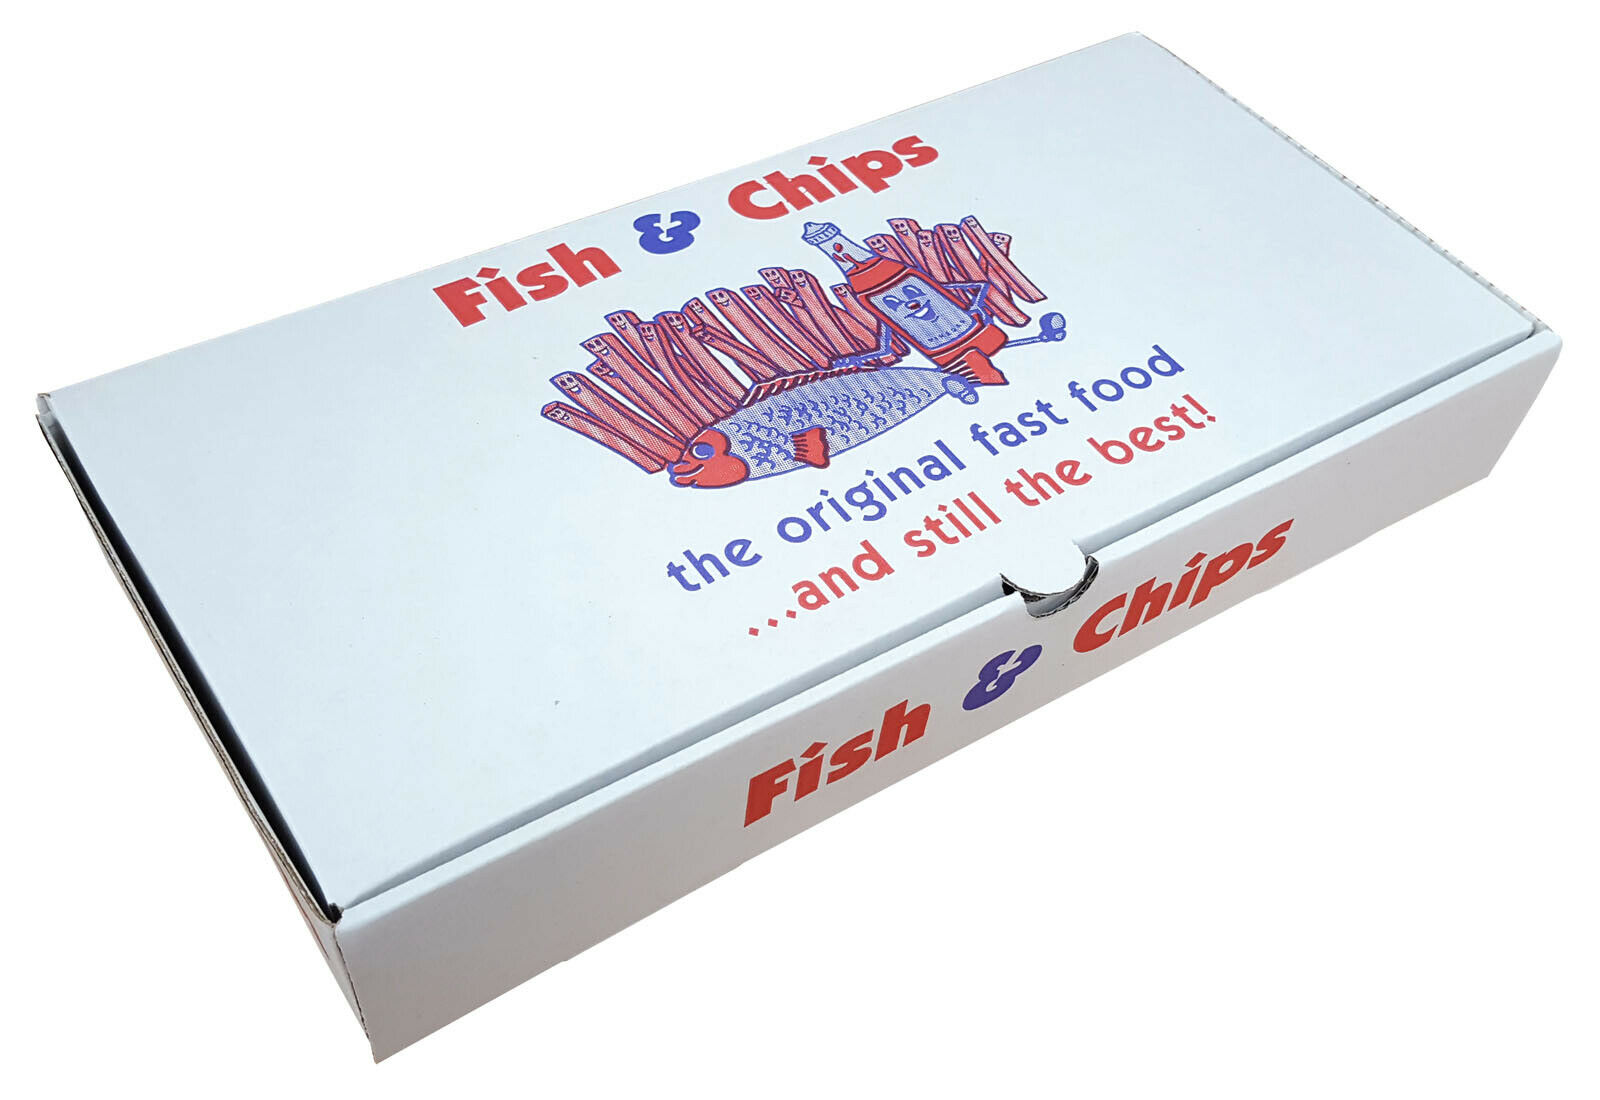 Fish and Chips-Chippy Takeaway Box Printed Die Cut Boxes 12" x 6" x 2" 